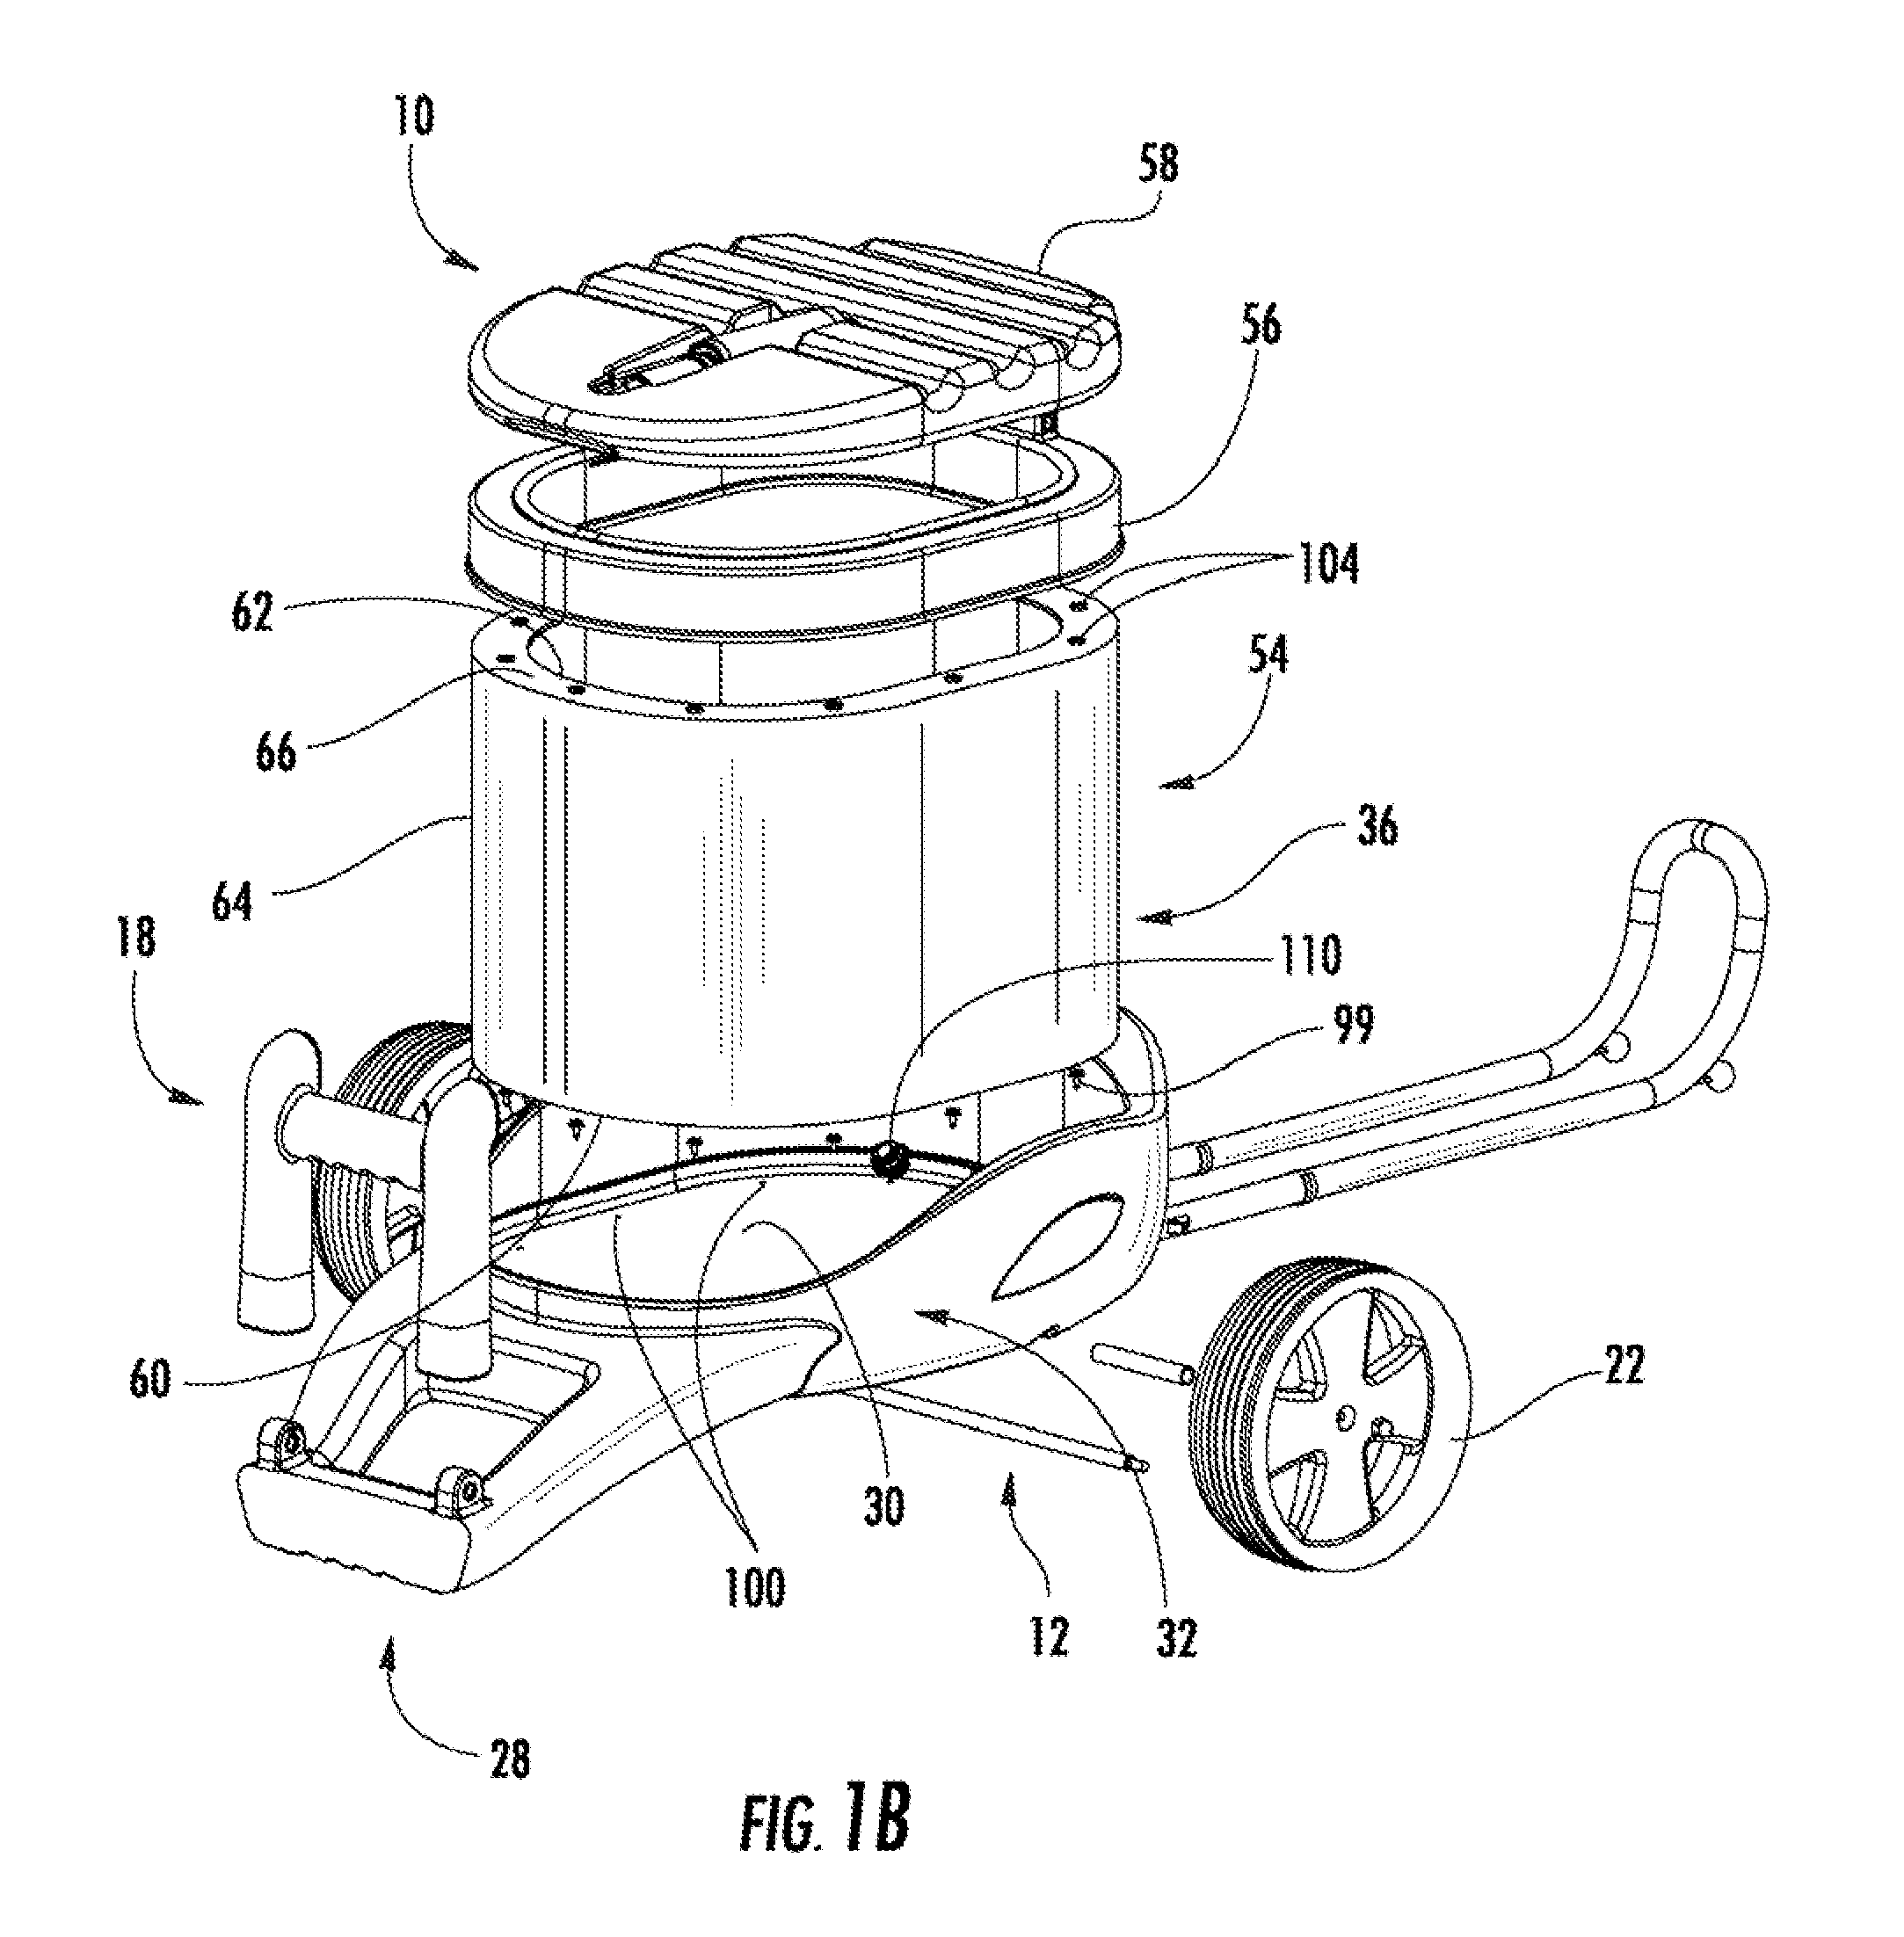 Travel cooler having separable wheeled base and insulated container